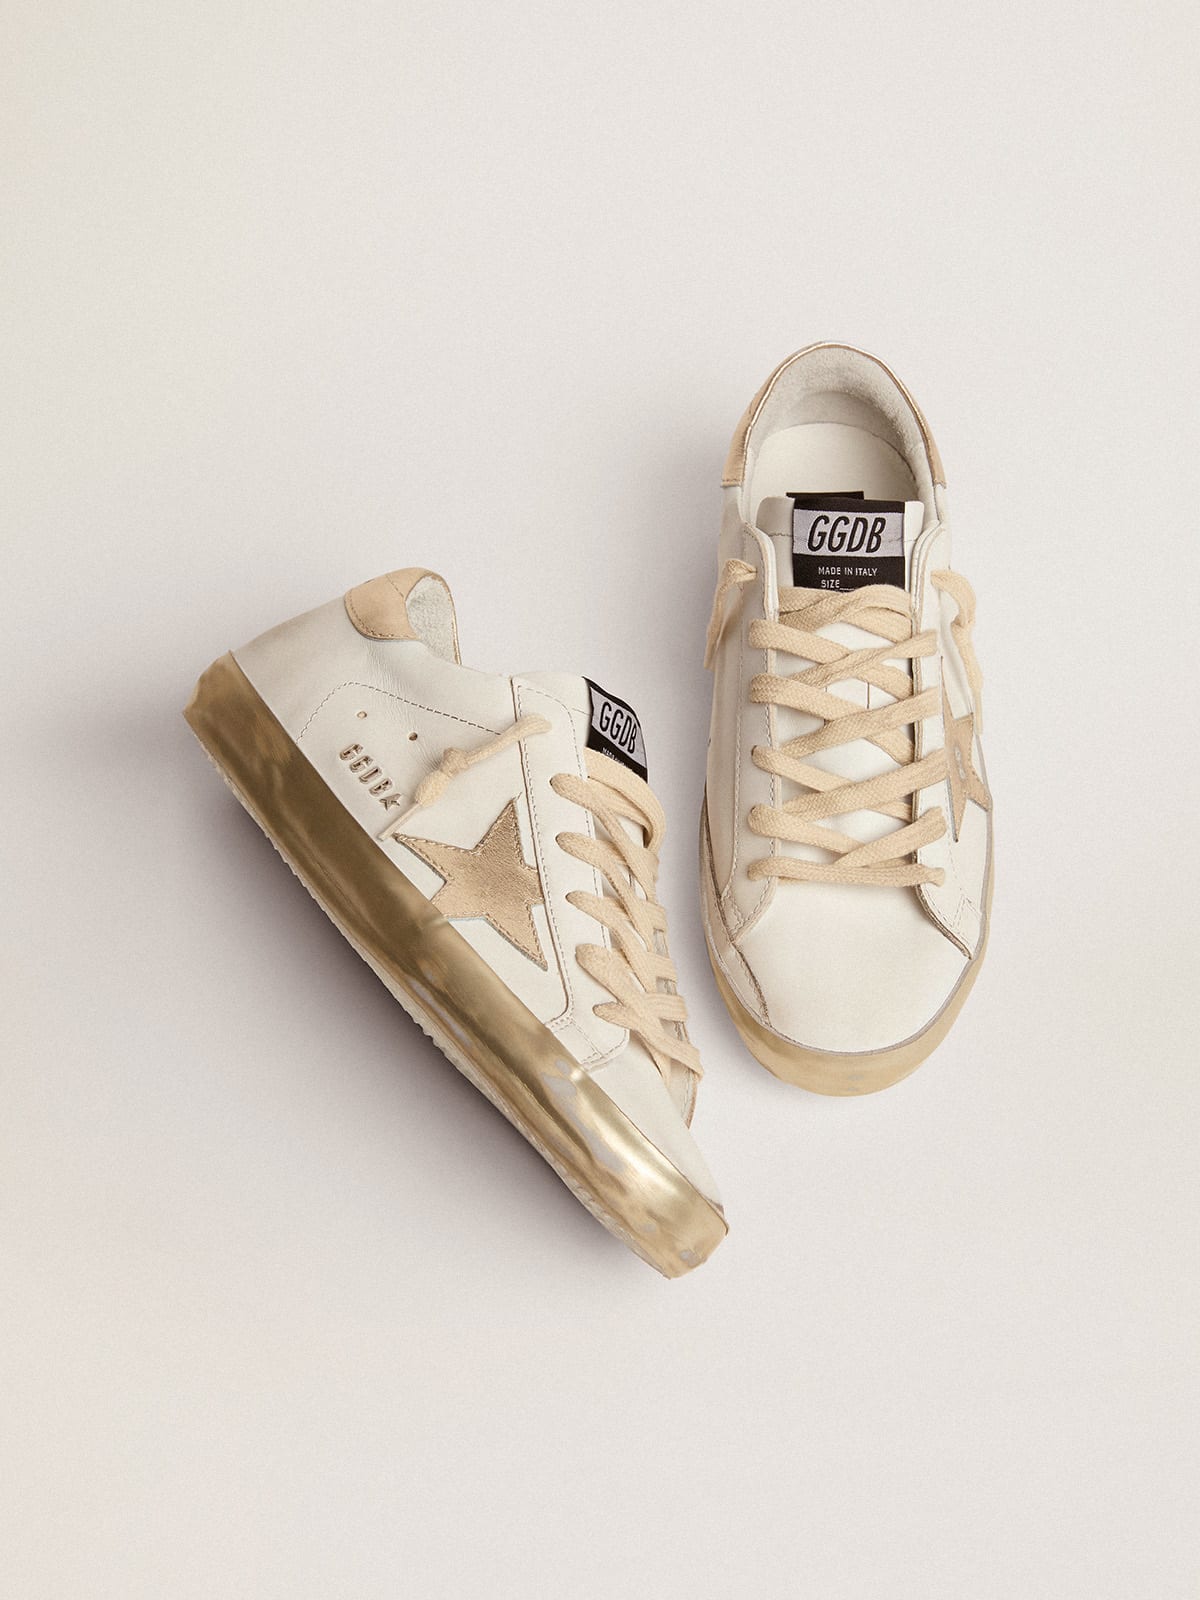 Golden Goose - Women's Super-Star with gold sparkle foxing and metal stud lettering in 